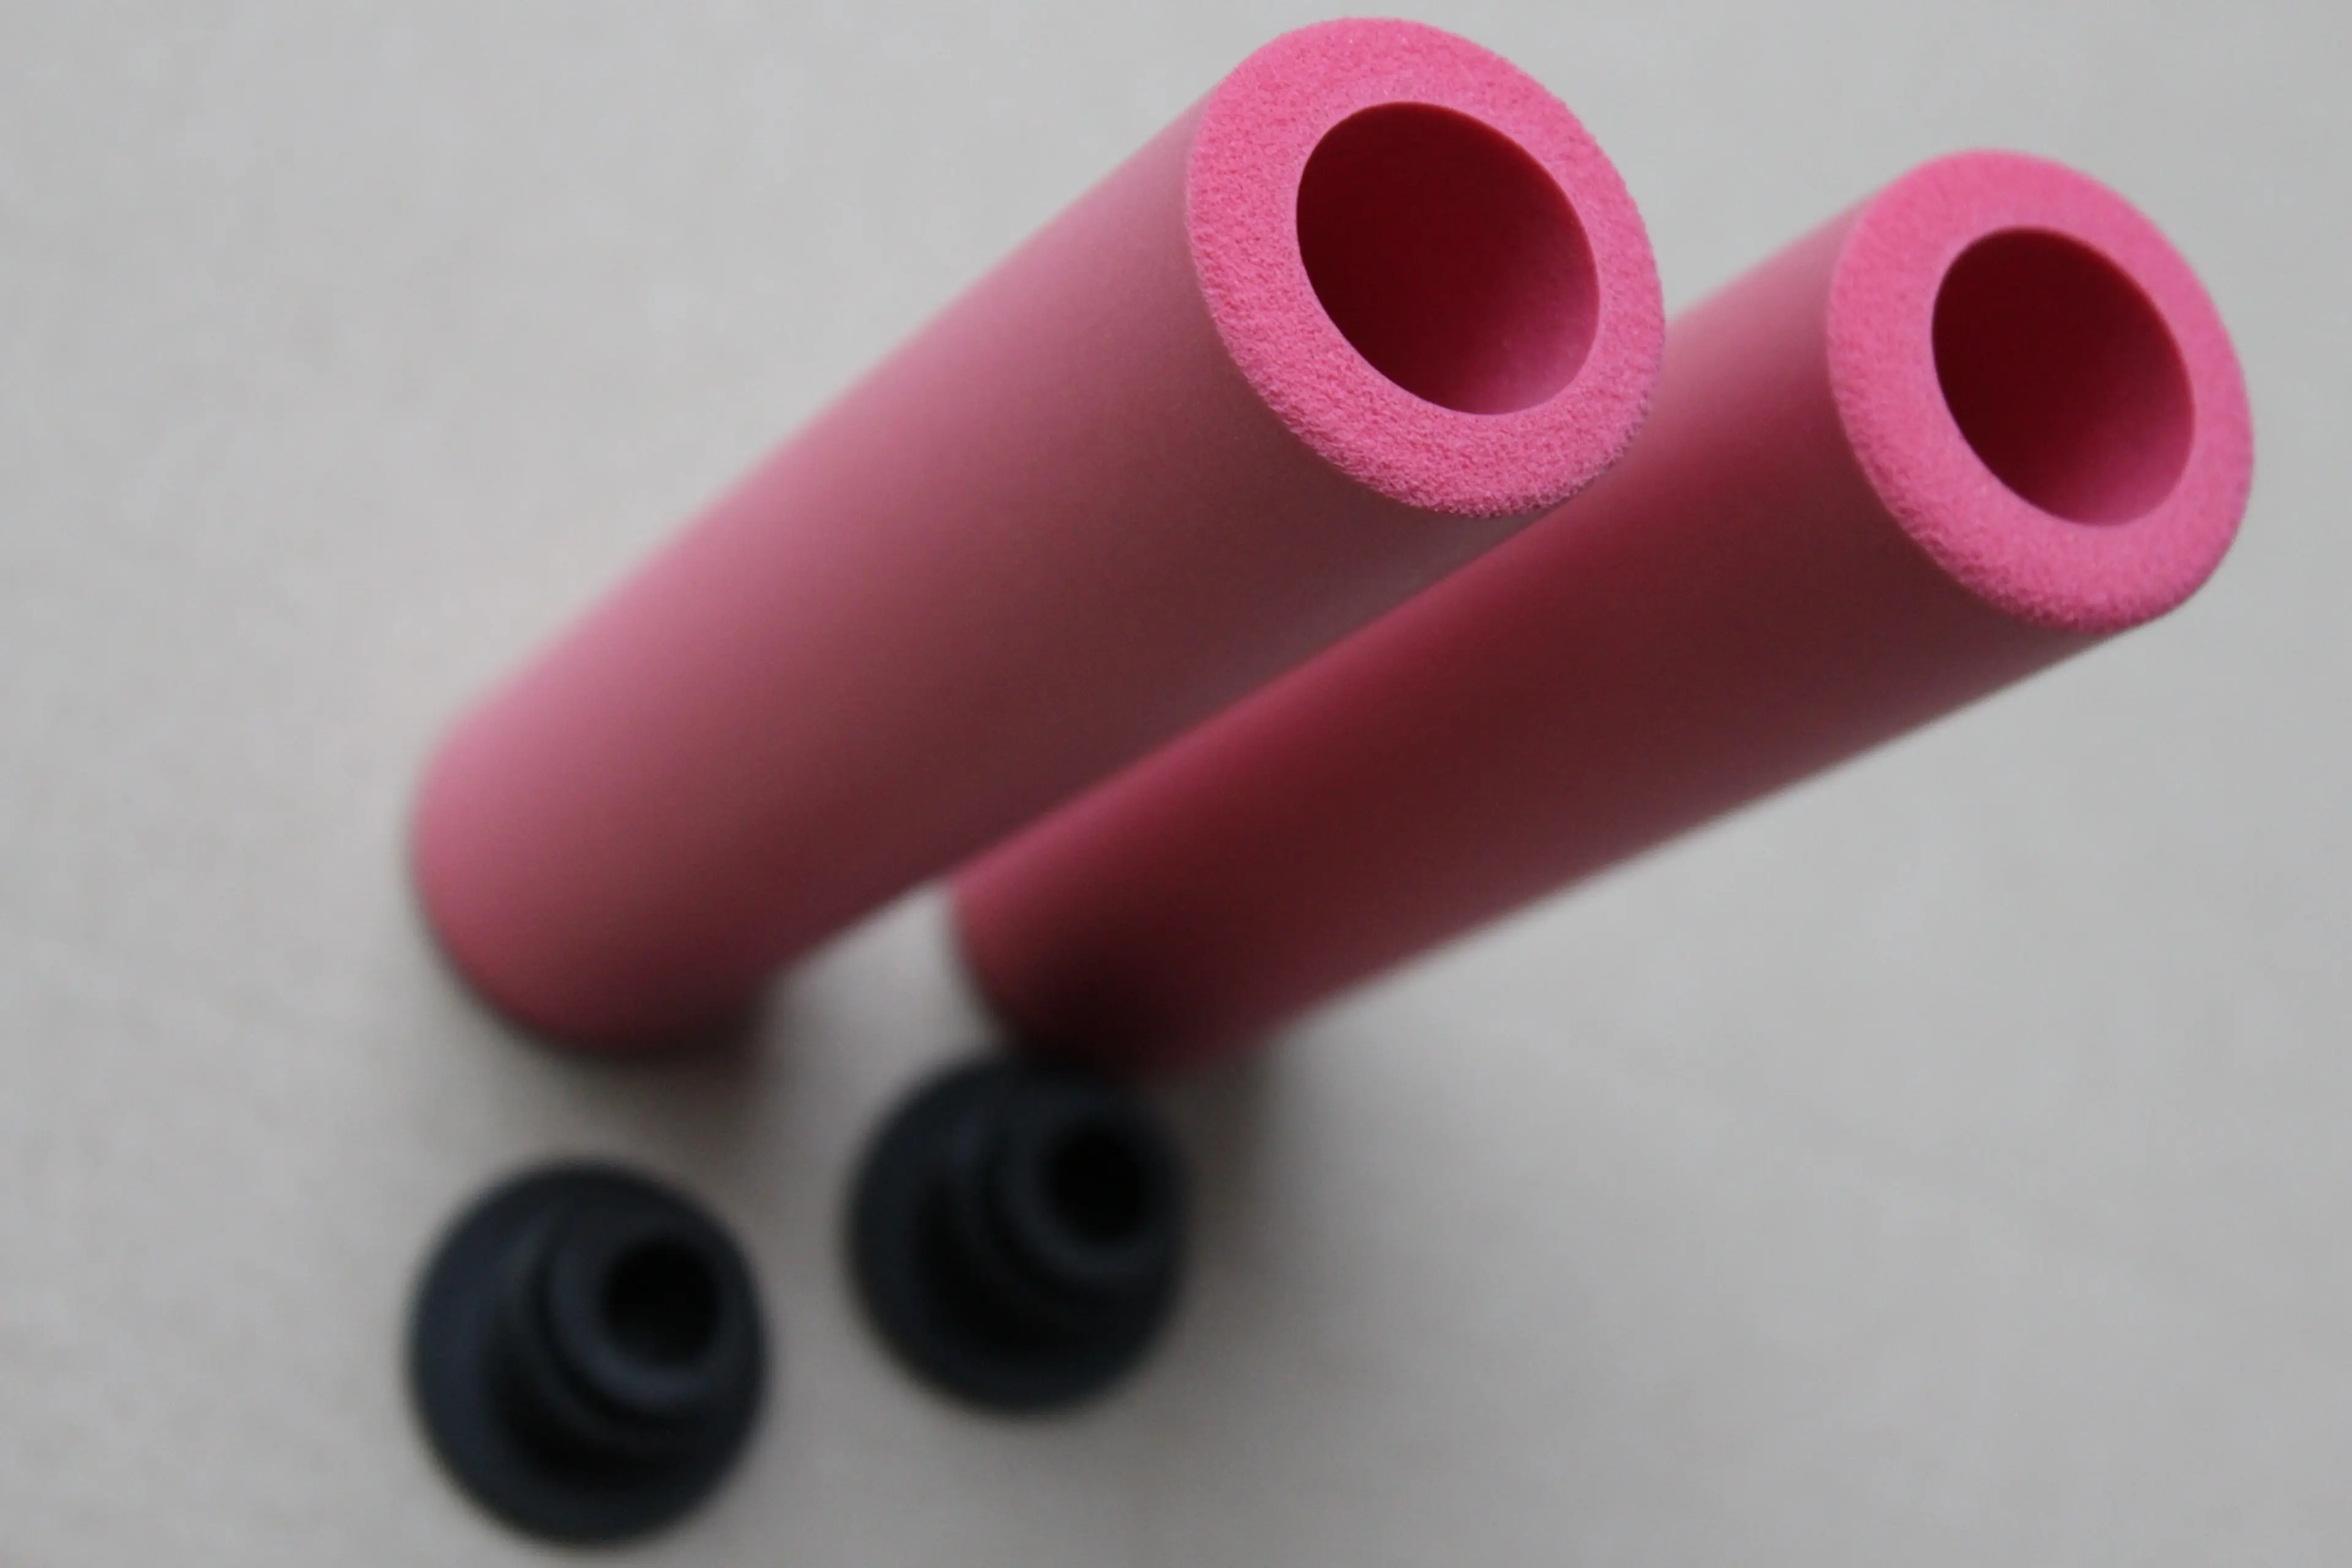 4. Silicone Racing Grips - roz